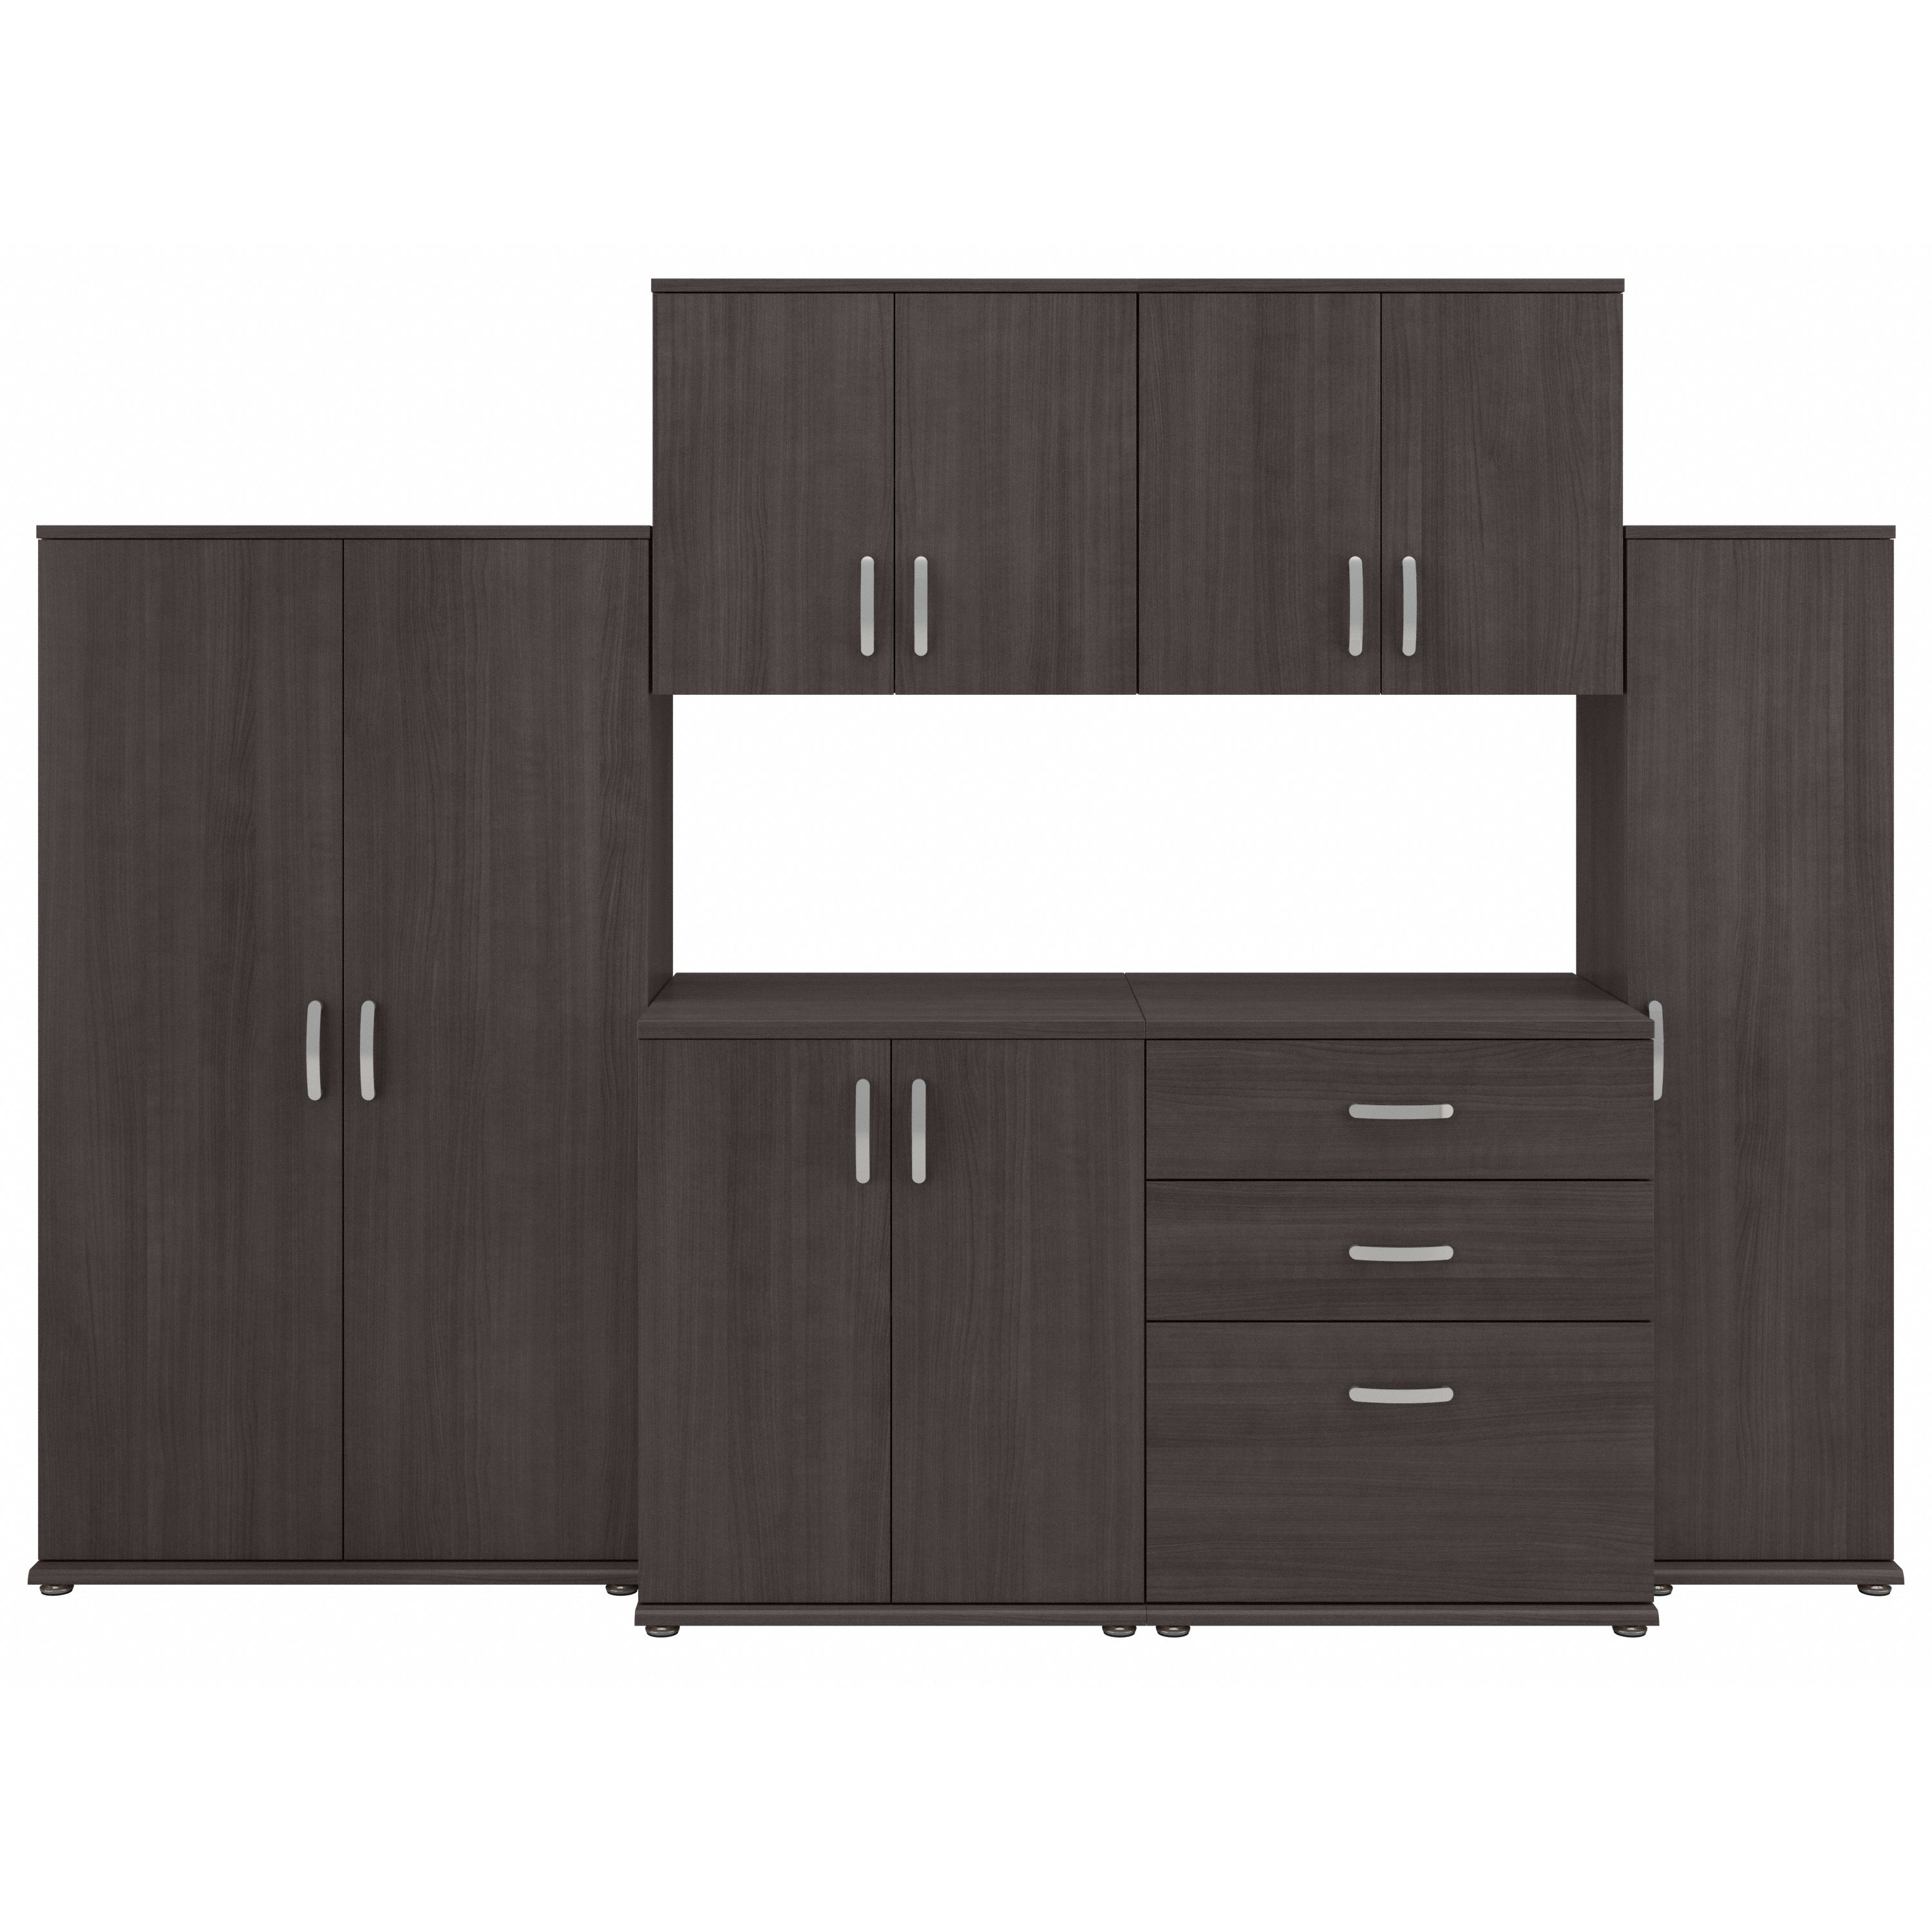 Shop Bush Business Furniture Universal 6 Piece Modular Closet Storage Set with Floor and Wall Cabinets 02 CLS002SG #color_storm gray